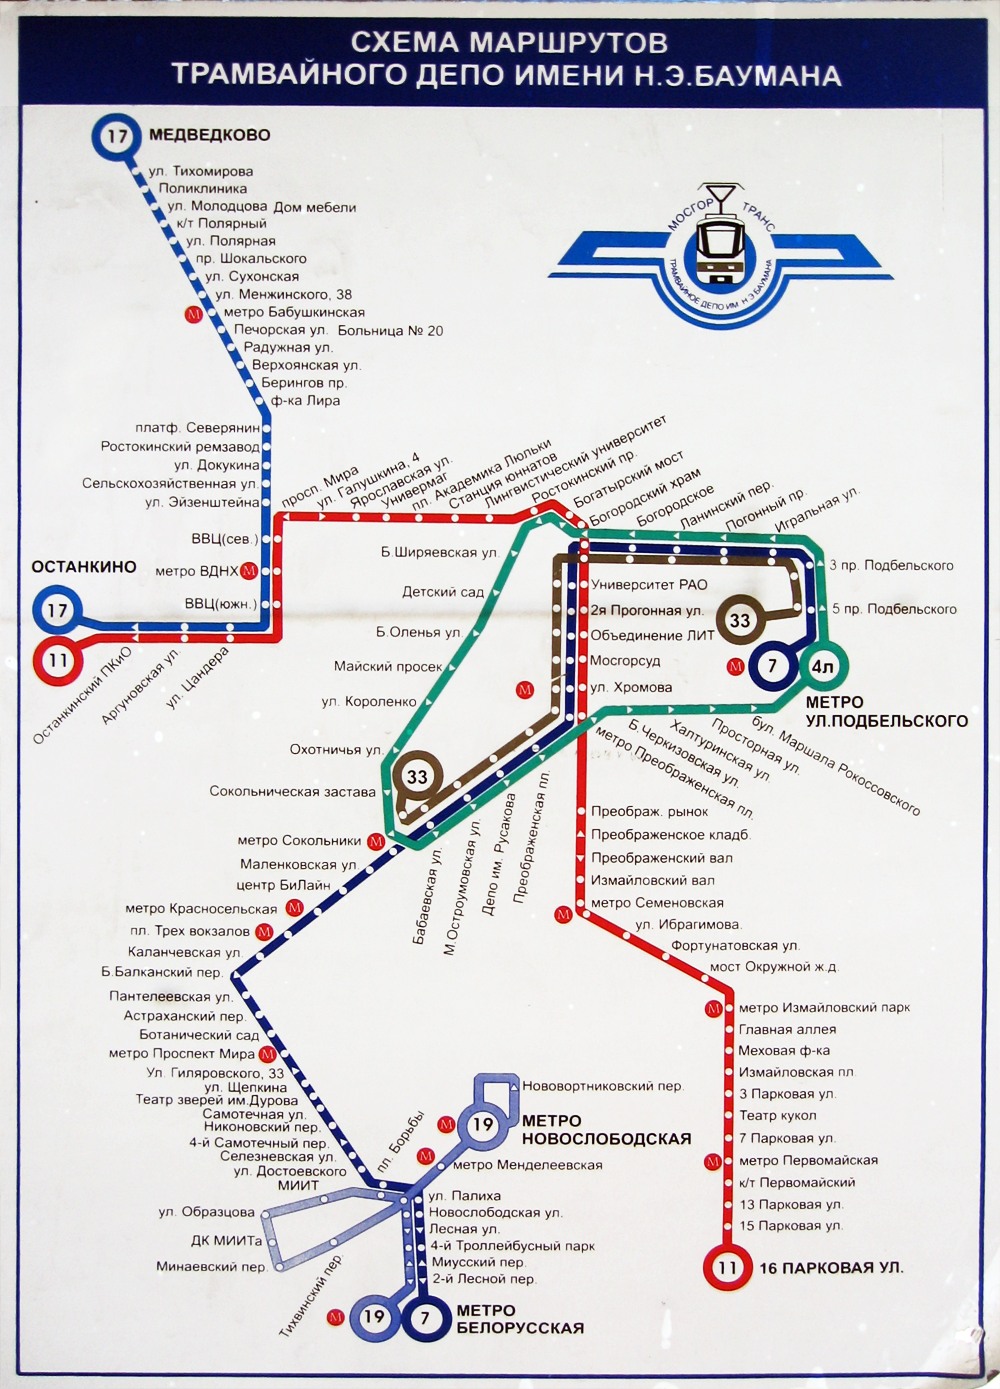 Moscow — Maps inside vehicles (tram)